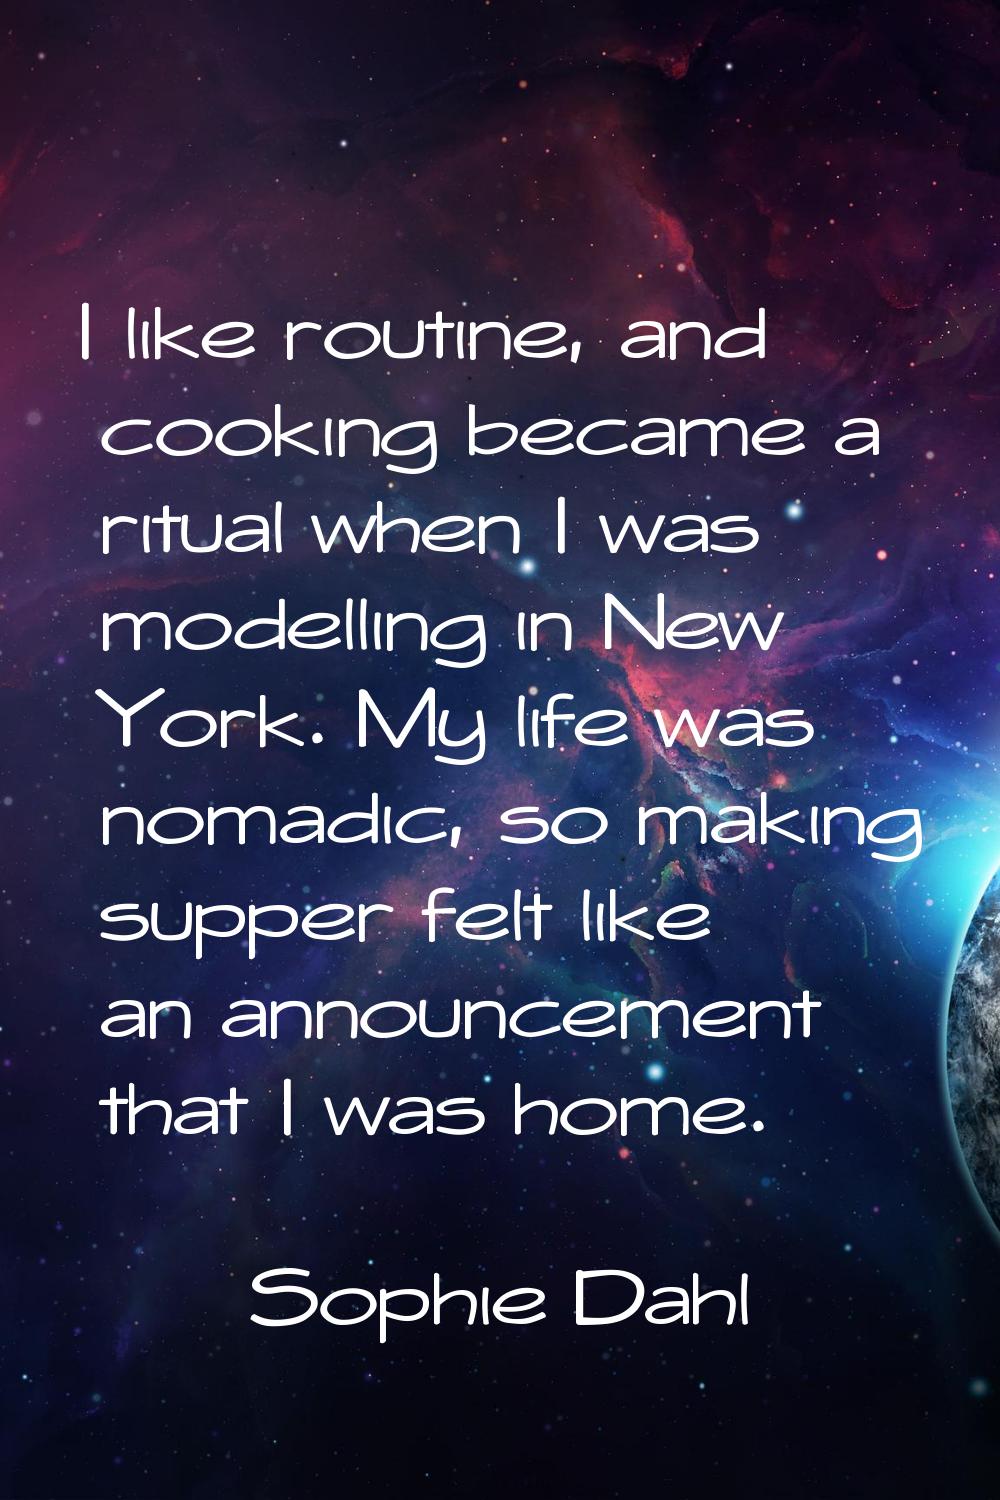 I like routine, and cooking became a ritual when I was modelling in New York. My life was nomadic, 